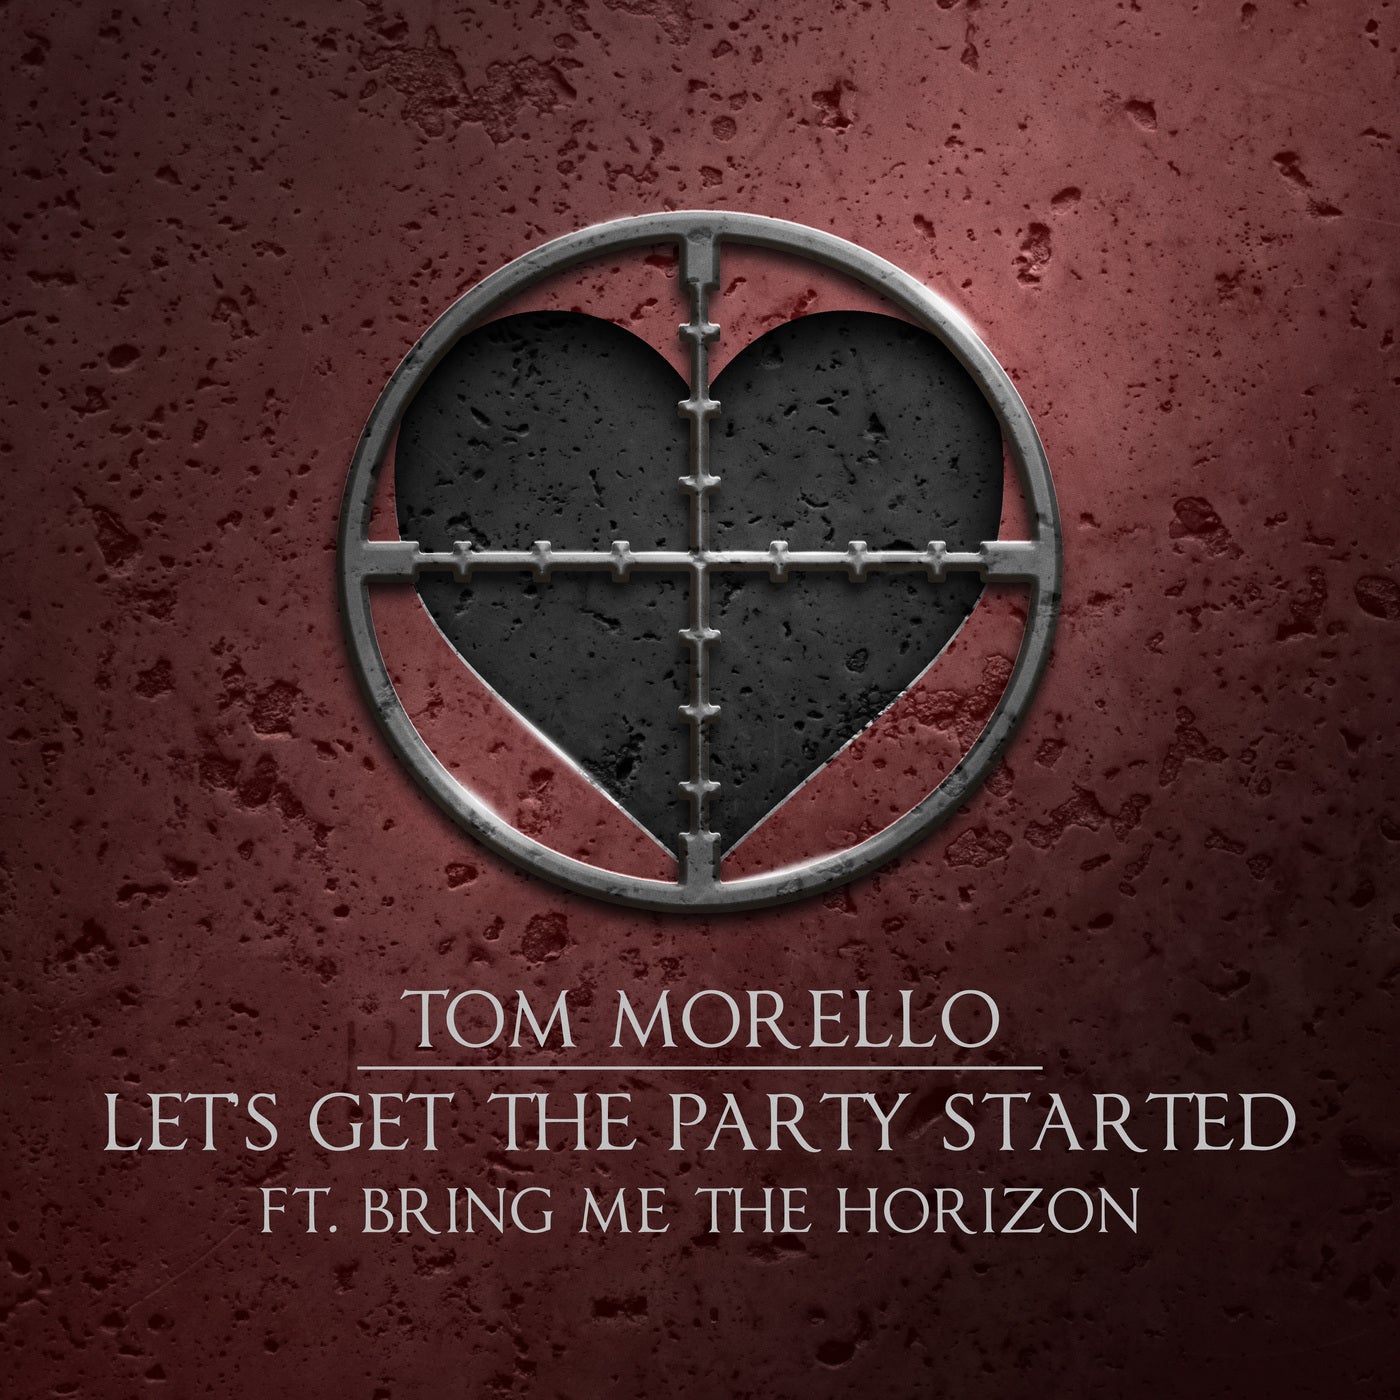 Tom Morello ft. featuring Bring Me The Horizon Let’s Get The Party Started cover artwork